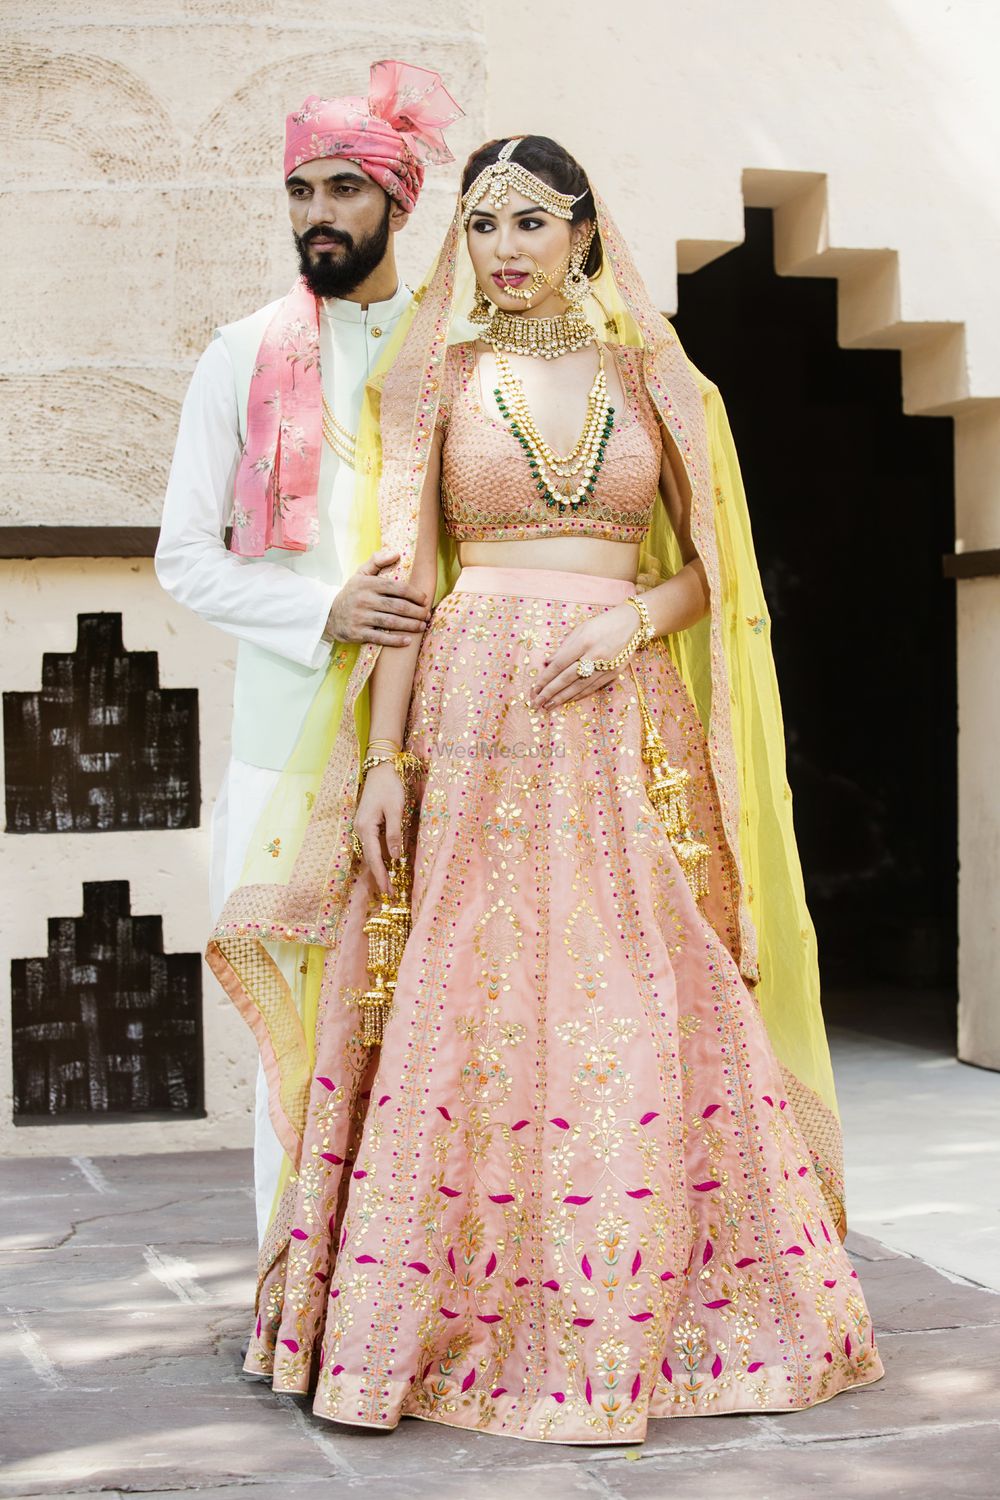 Photo of A bride and groom coordinate in white and pink on their wedding day